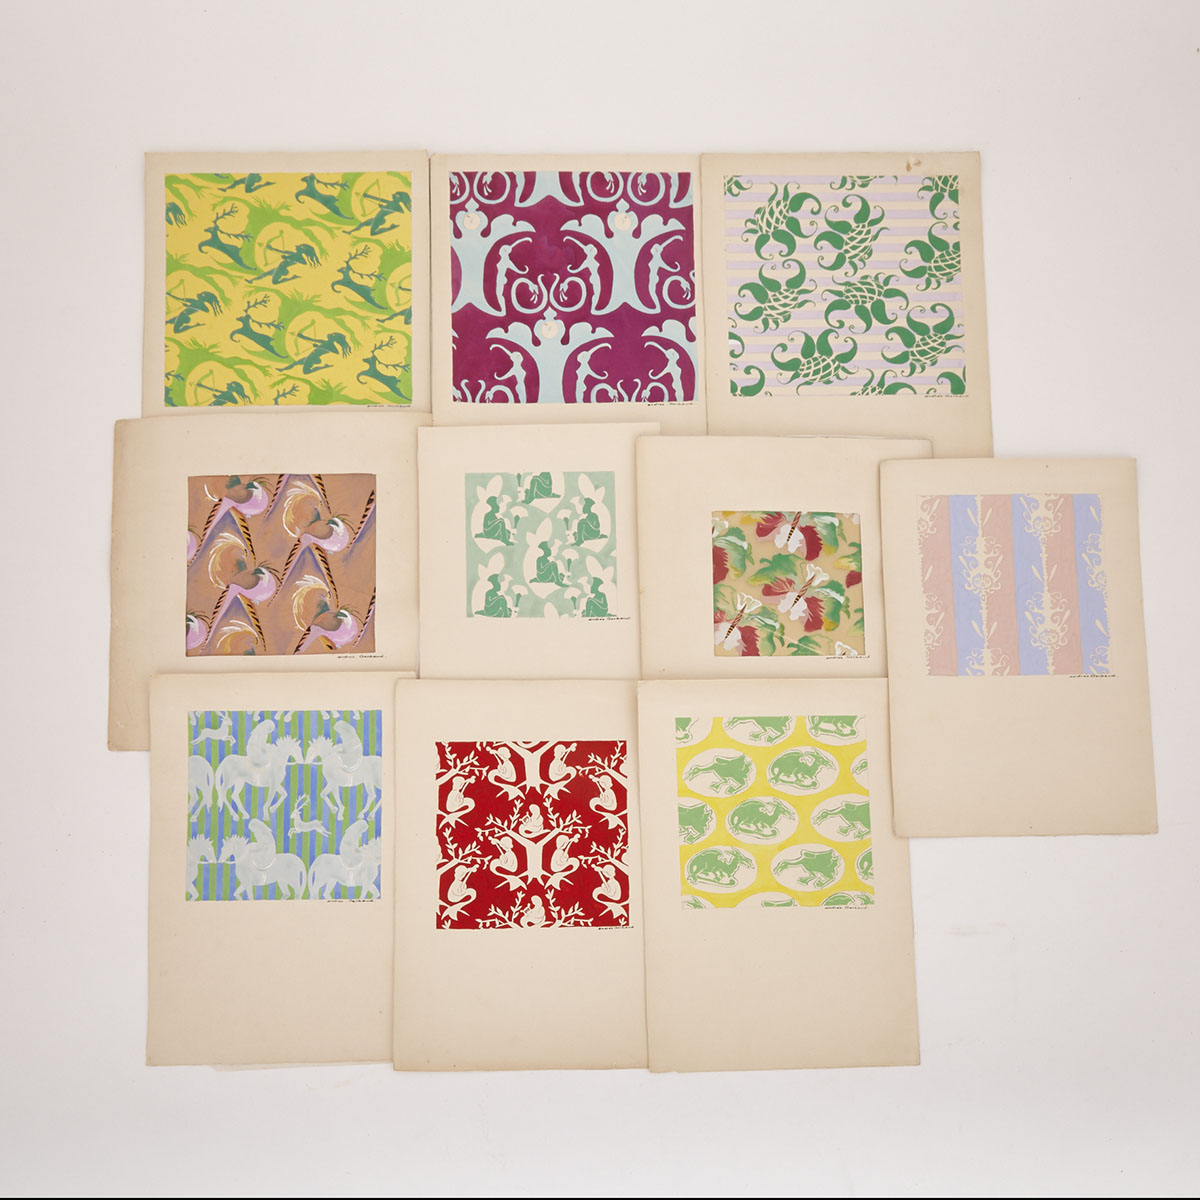 Group of Ten Art Deco Woodblock Wallpaper and Fabric Patterns each signed Andréa Gerbaud, early 20th century